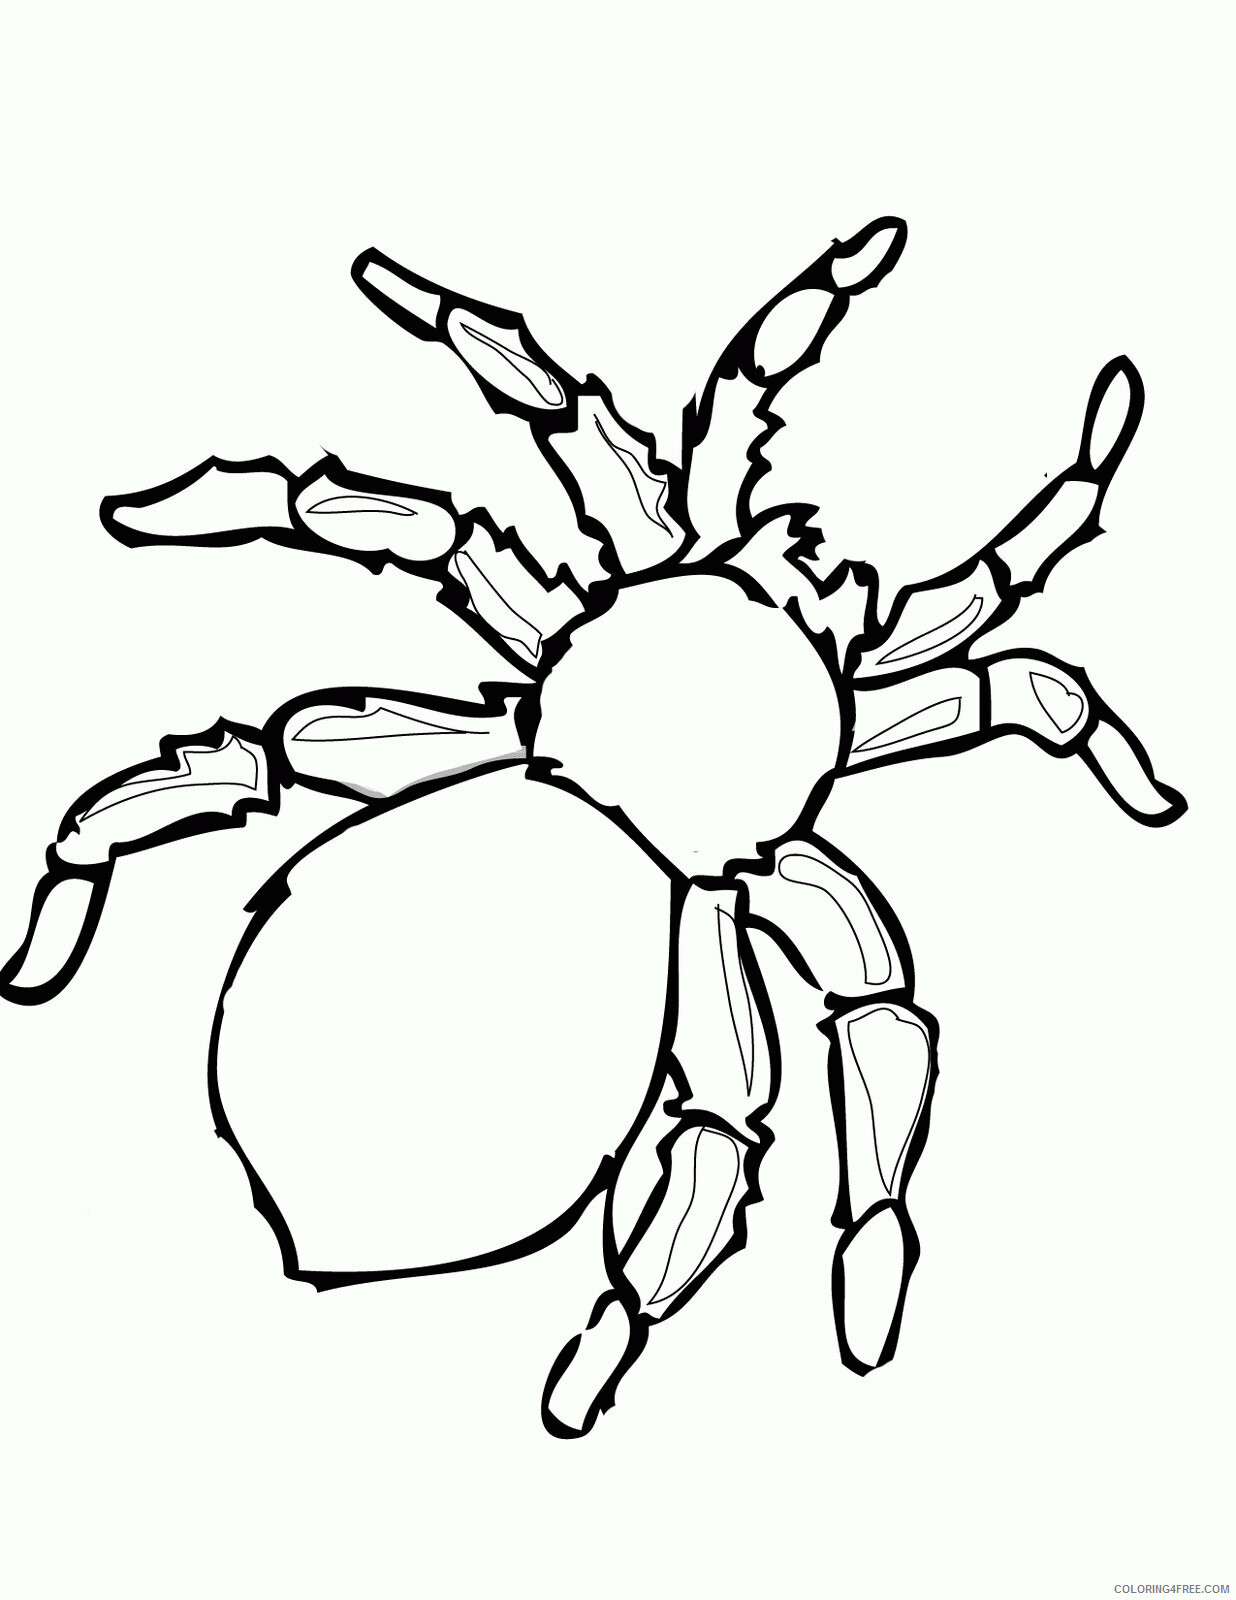 Spider Coloring Sheets Animal Coloring Pages Printable 2021 4271 Coloring4free